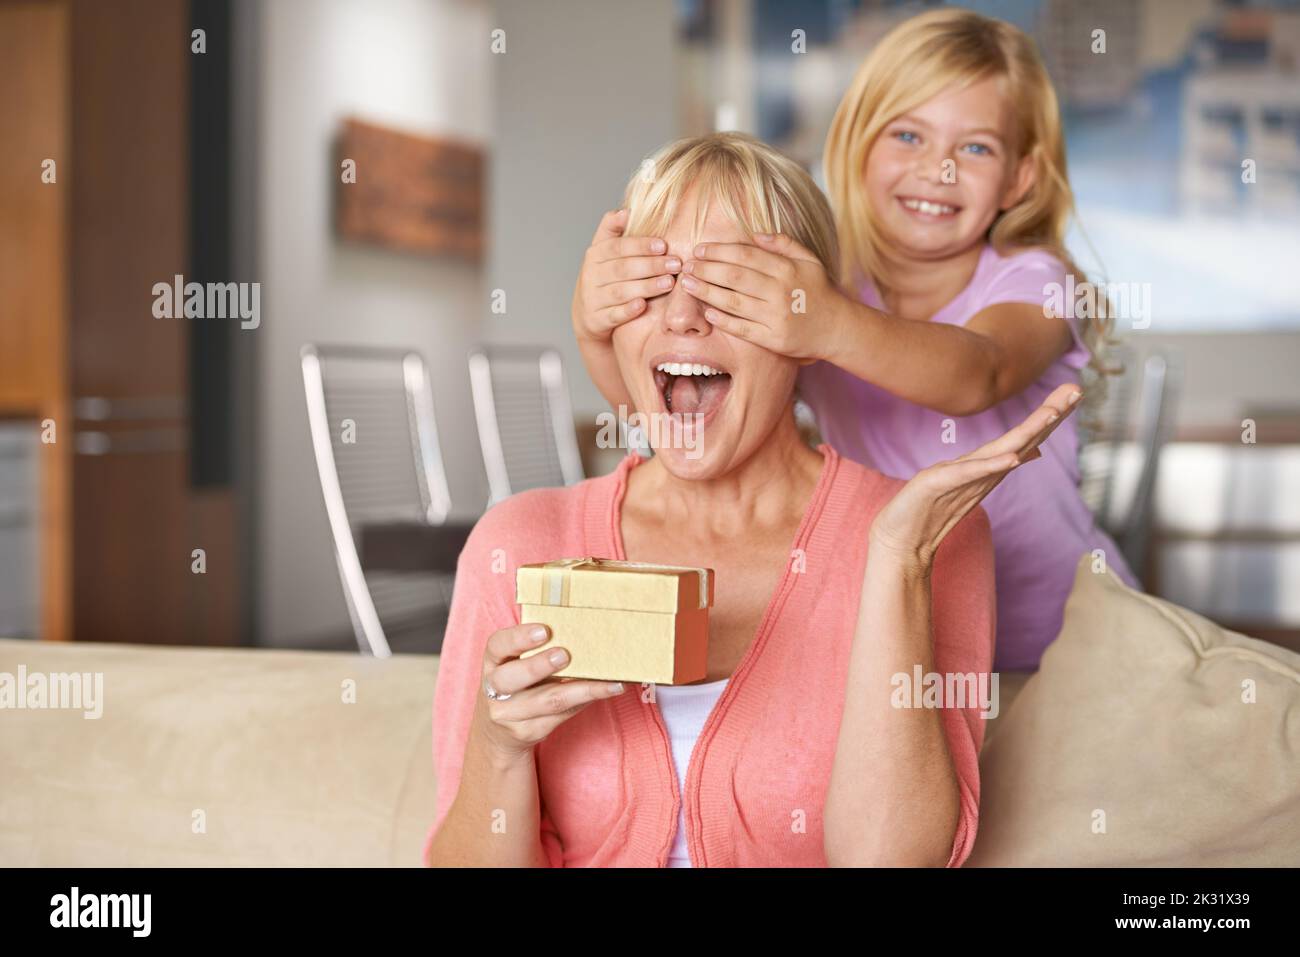 Open your hands and close your eyes for a big surprise. a young girl surprising her mother with a gift. Stock Photo